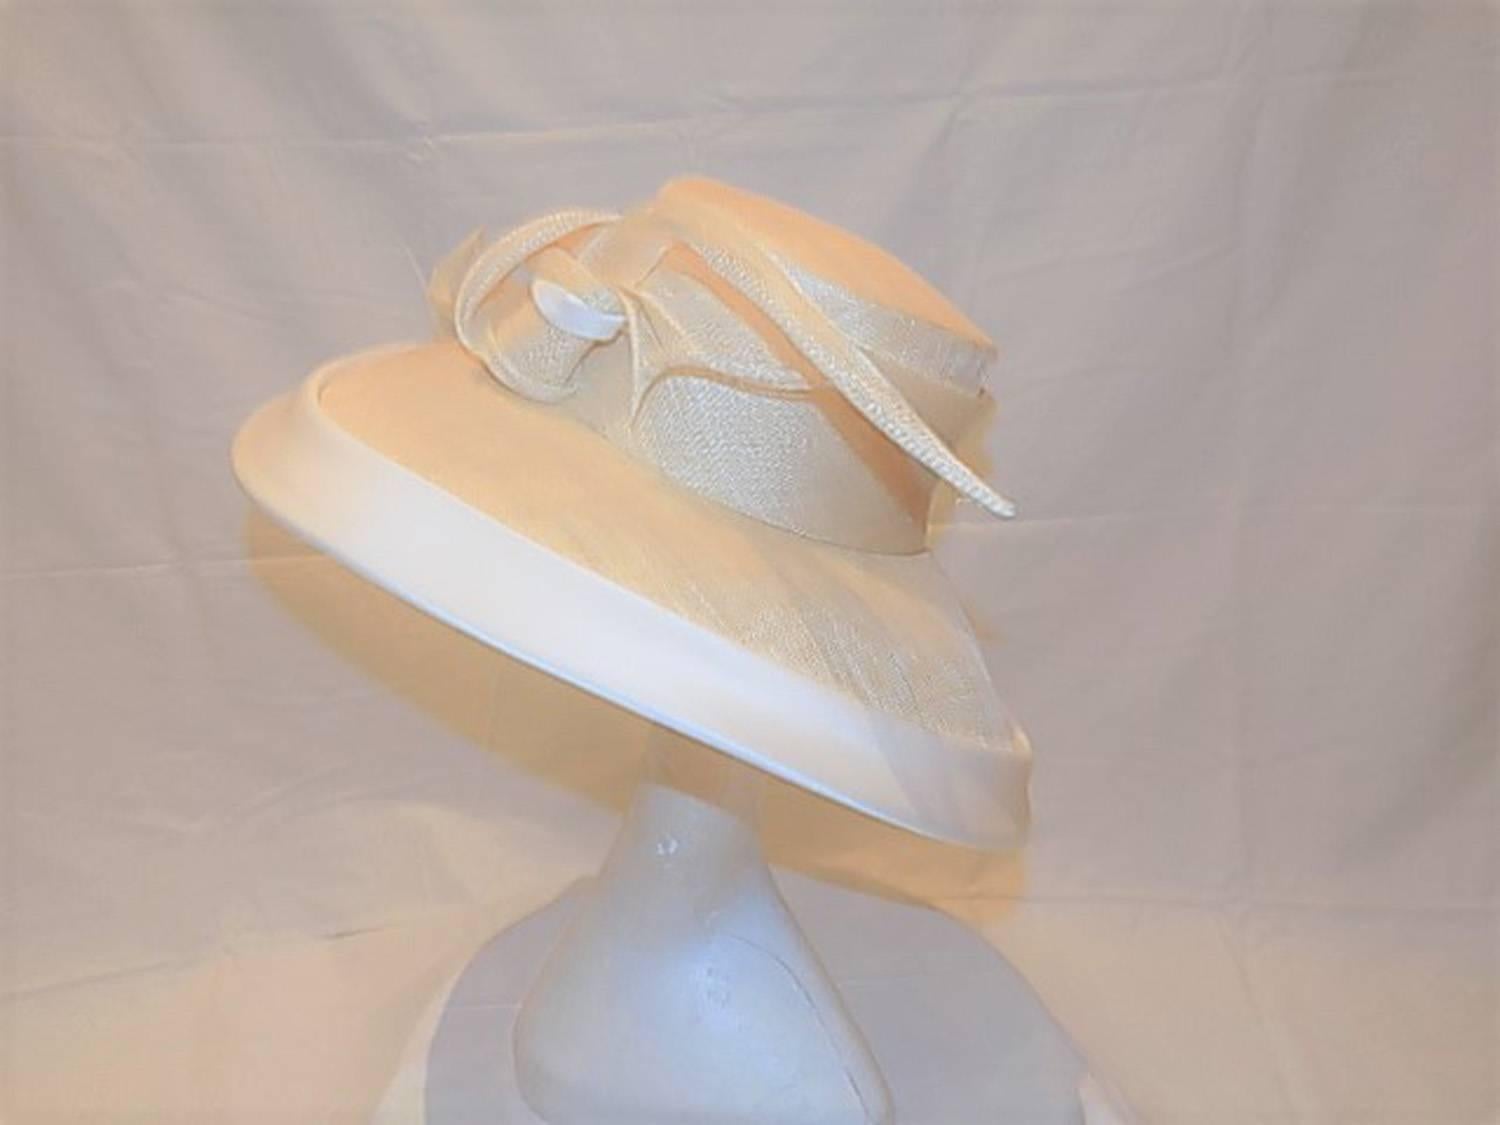 Royals  most favorite hat designer. This is her new never worn spectacular summer wide brim hat with silk trim and signature twirl. Retailed close to $2000. 
The Duchess of Cambridge debuted beret  from Sylvia Fletcher from royal milliner James Lock